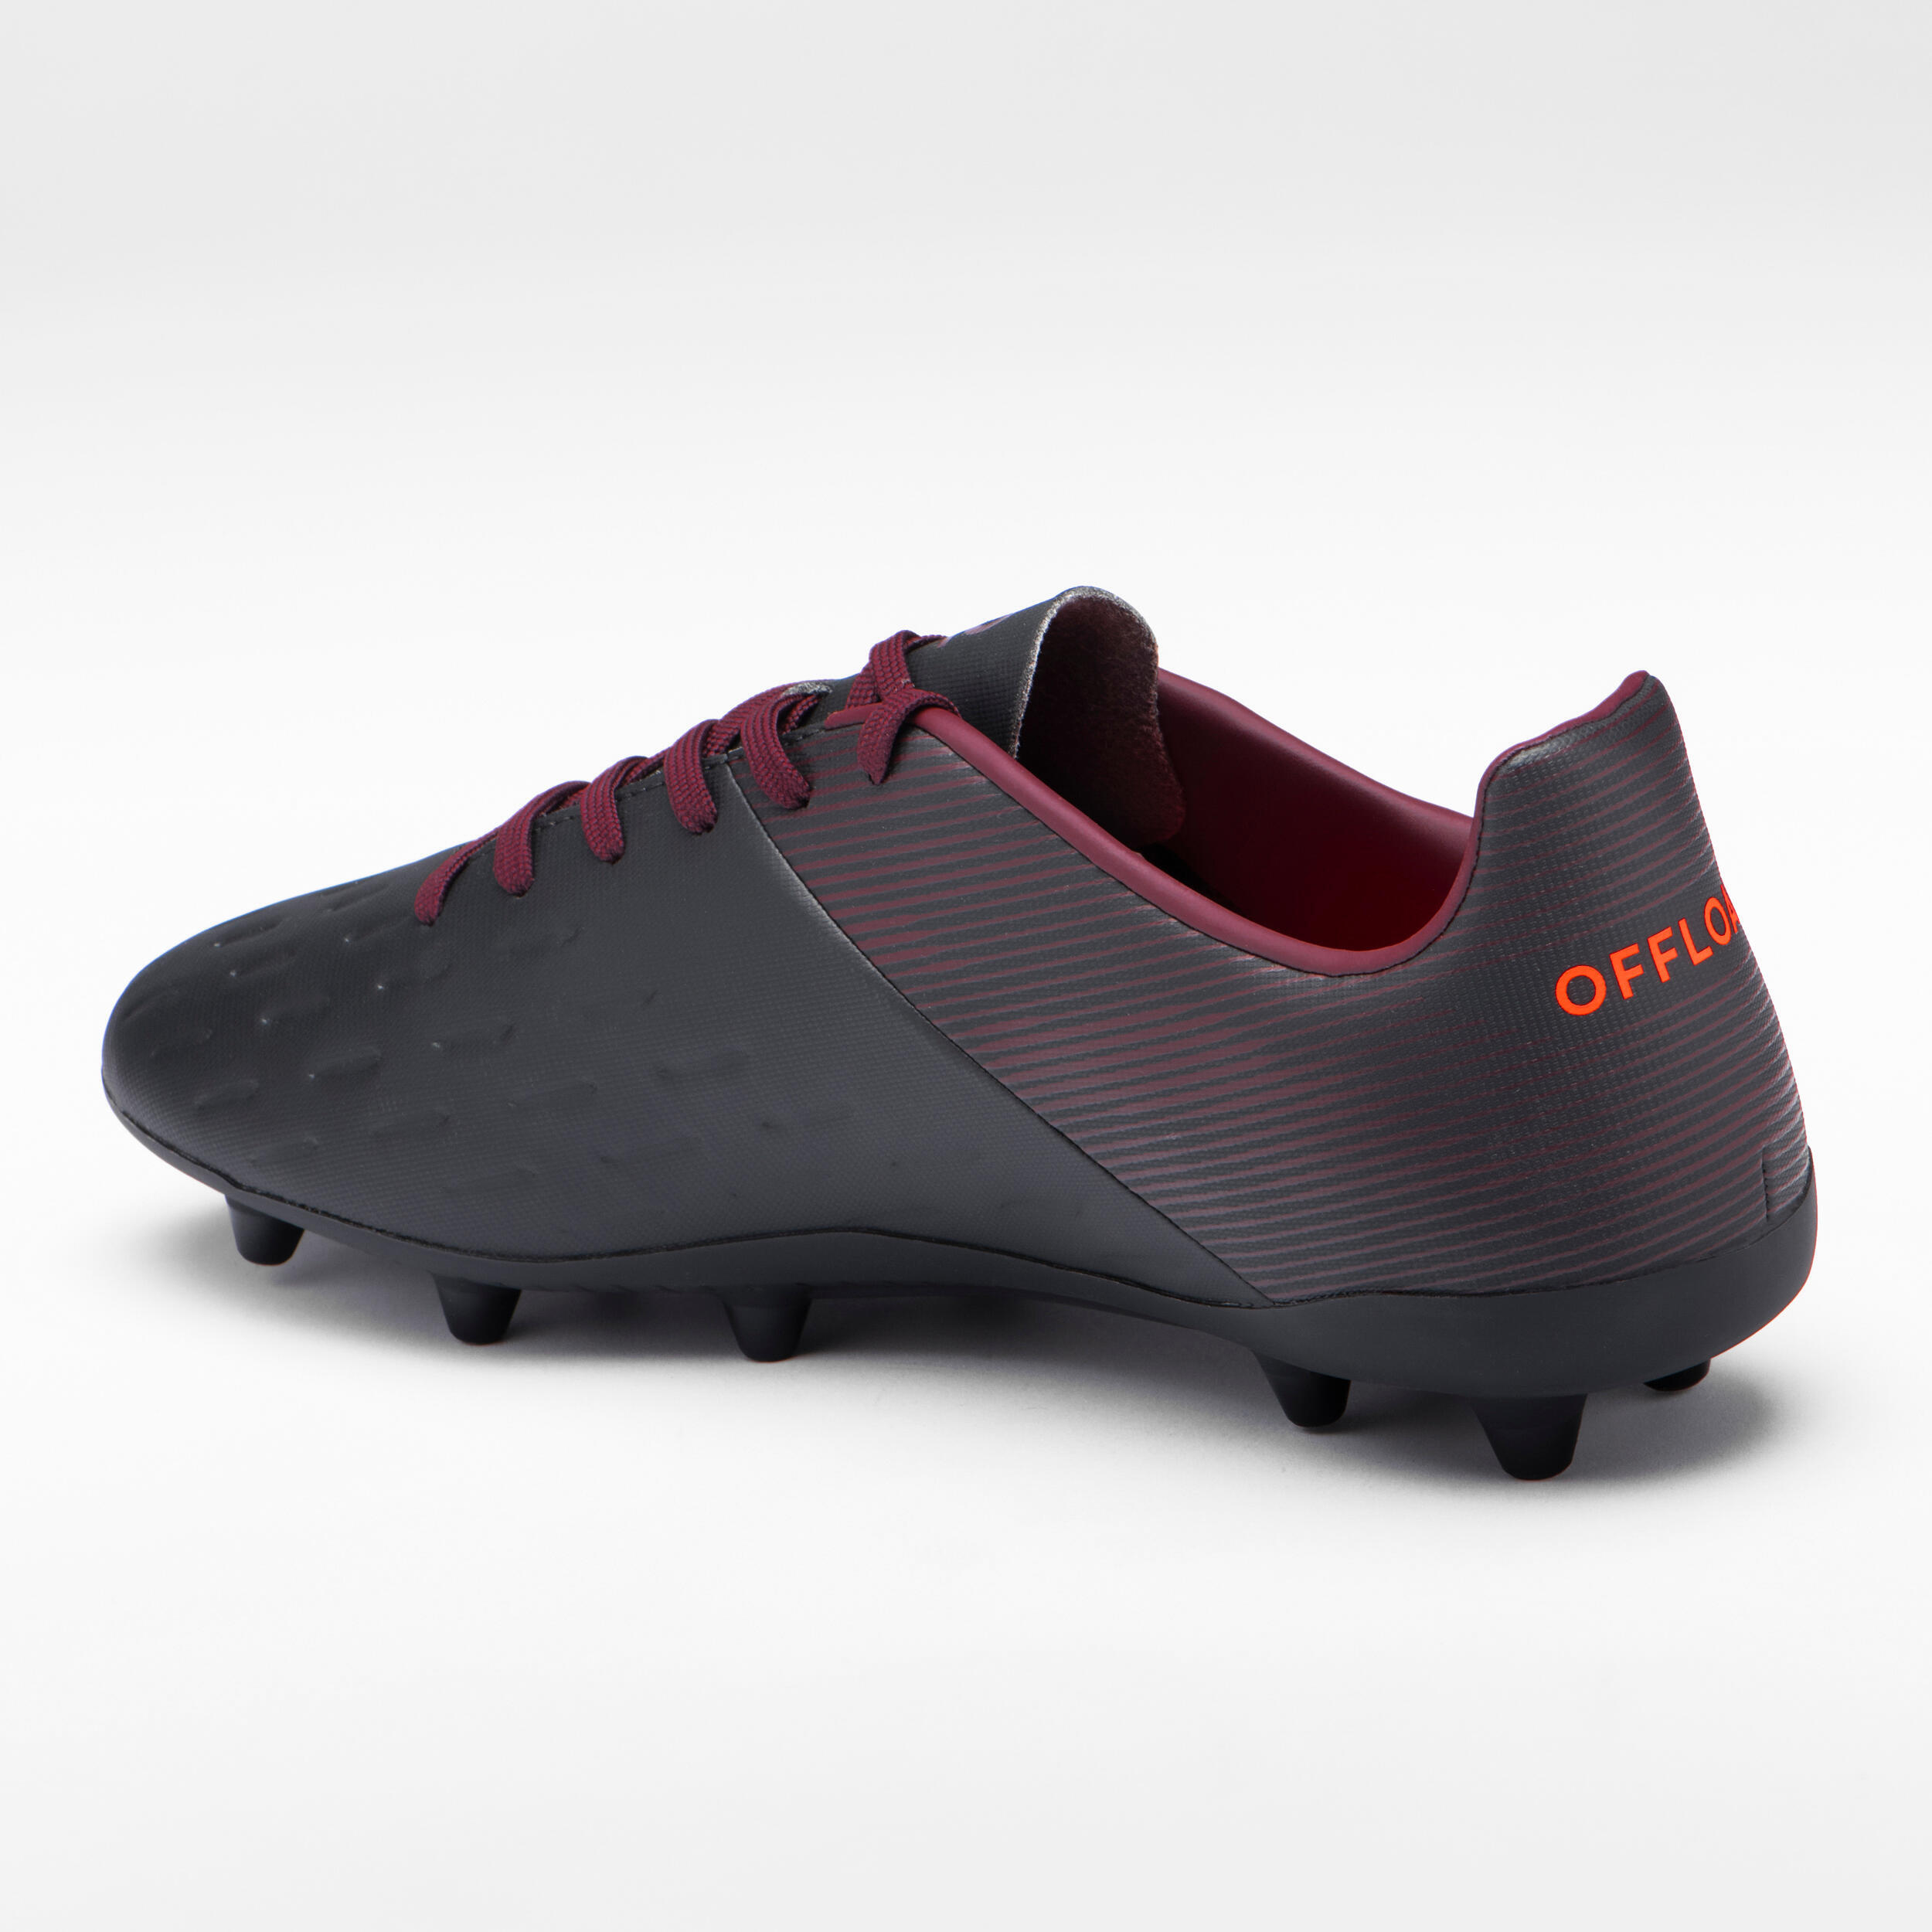 Men's Moulded Dry Pitch Rugby Boots Advance R100 FG - Black/Burgundy 2/9